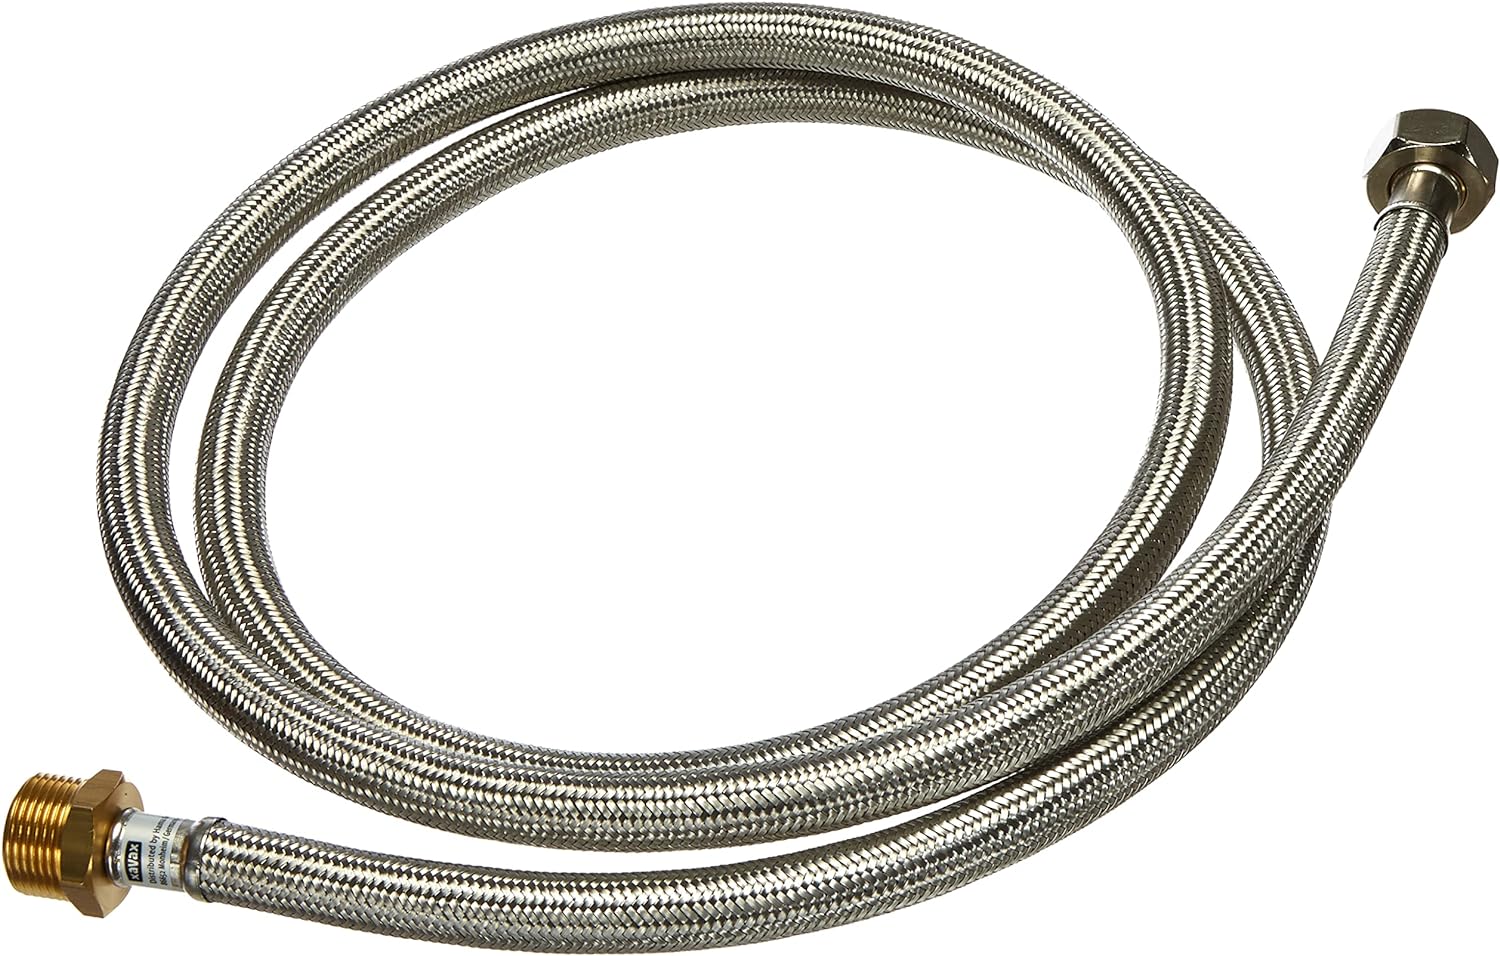 Xavax 00110959 Armoured Dishwasher Inlet Hose Extension (Service/Workshop) 1 m - Amazing Gadgets Outlet